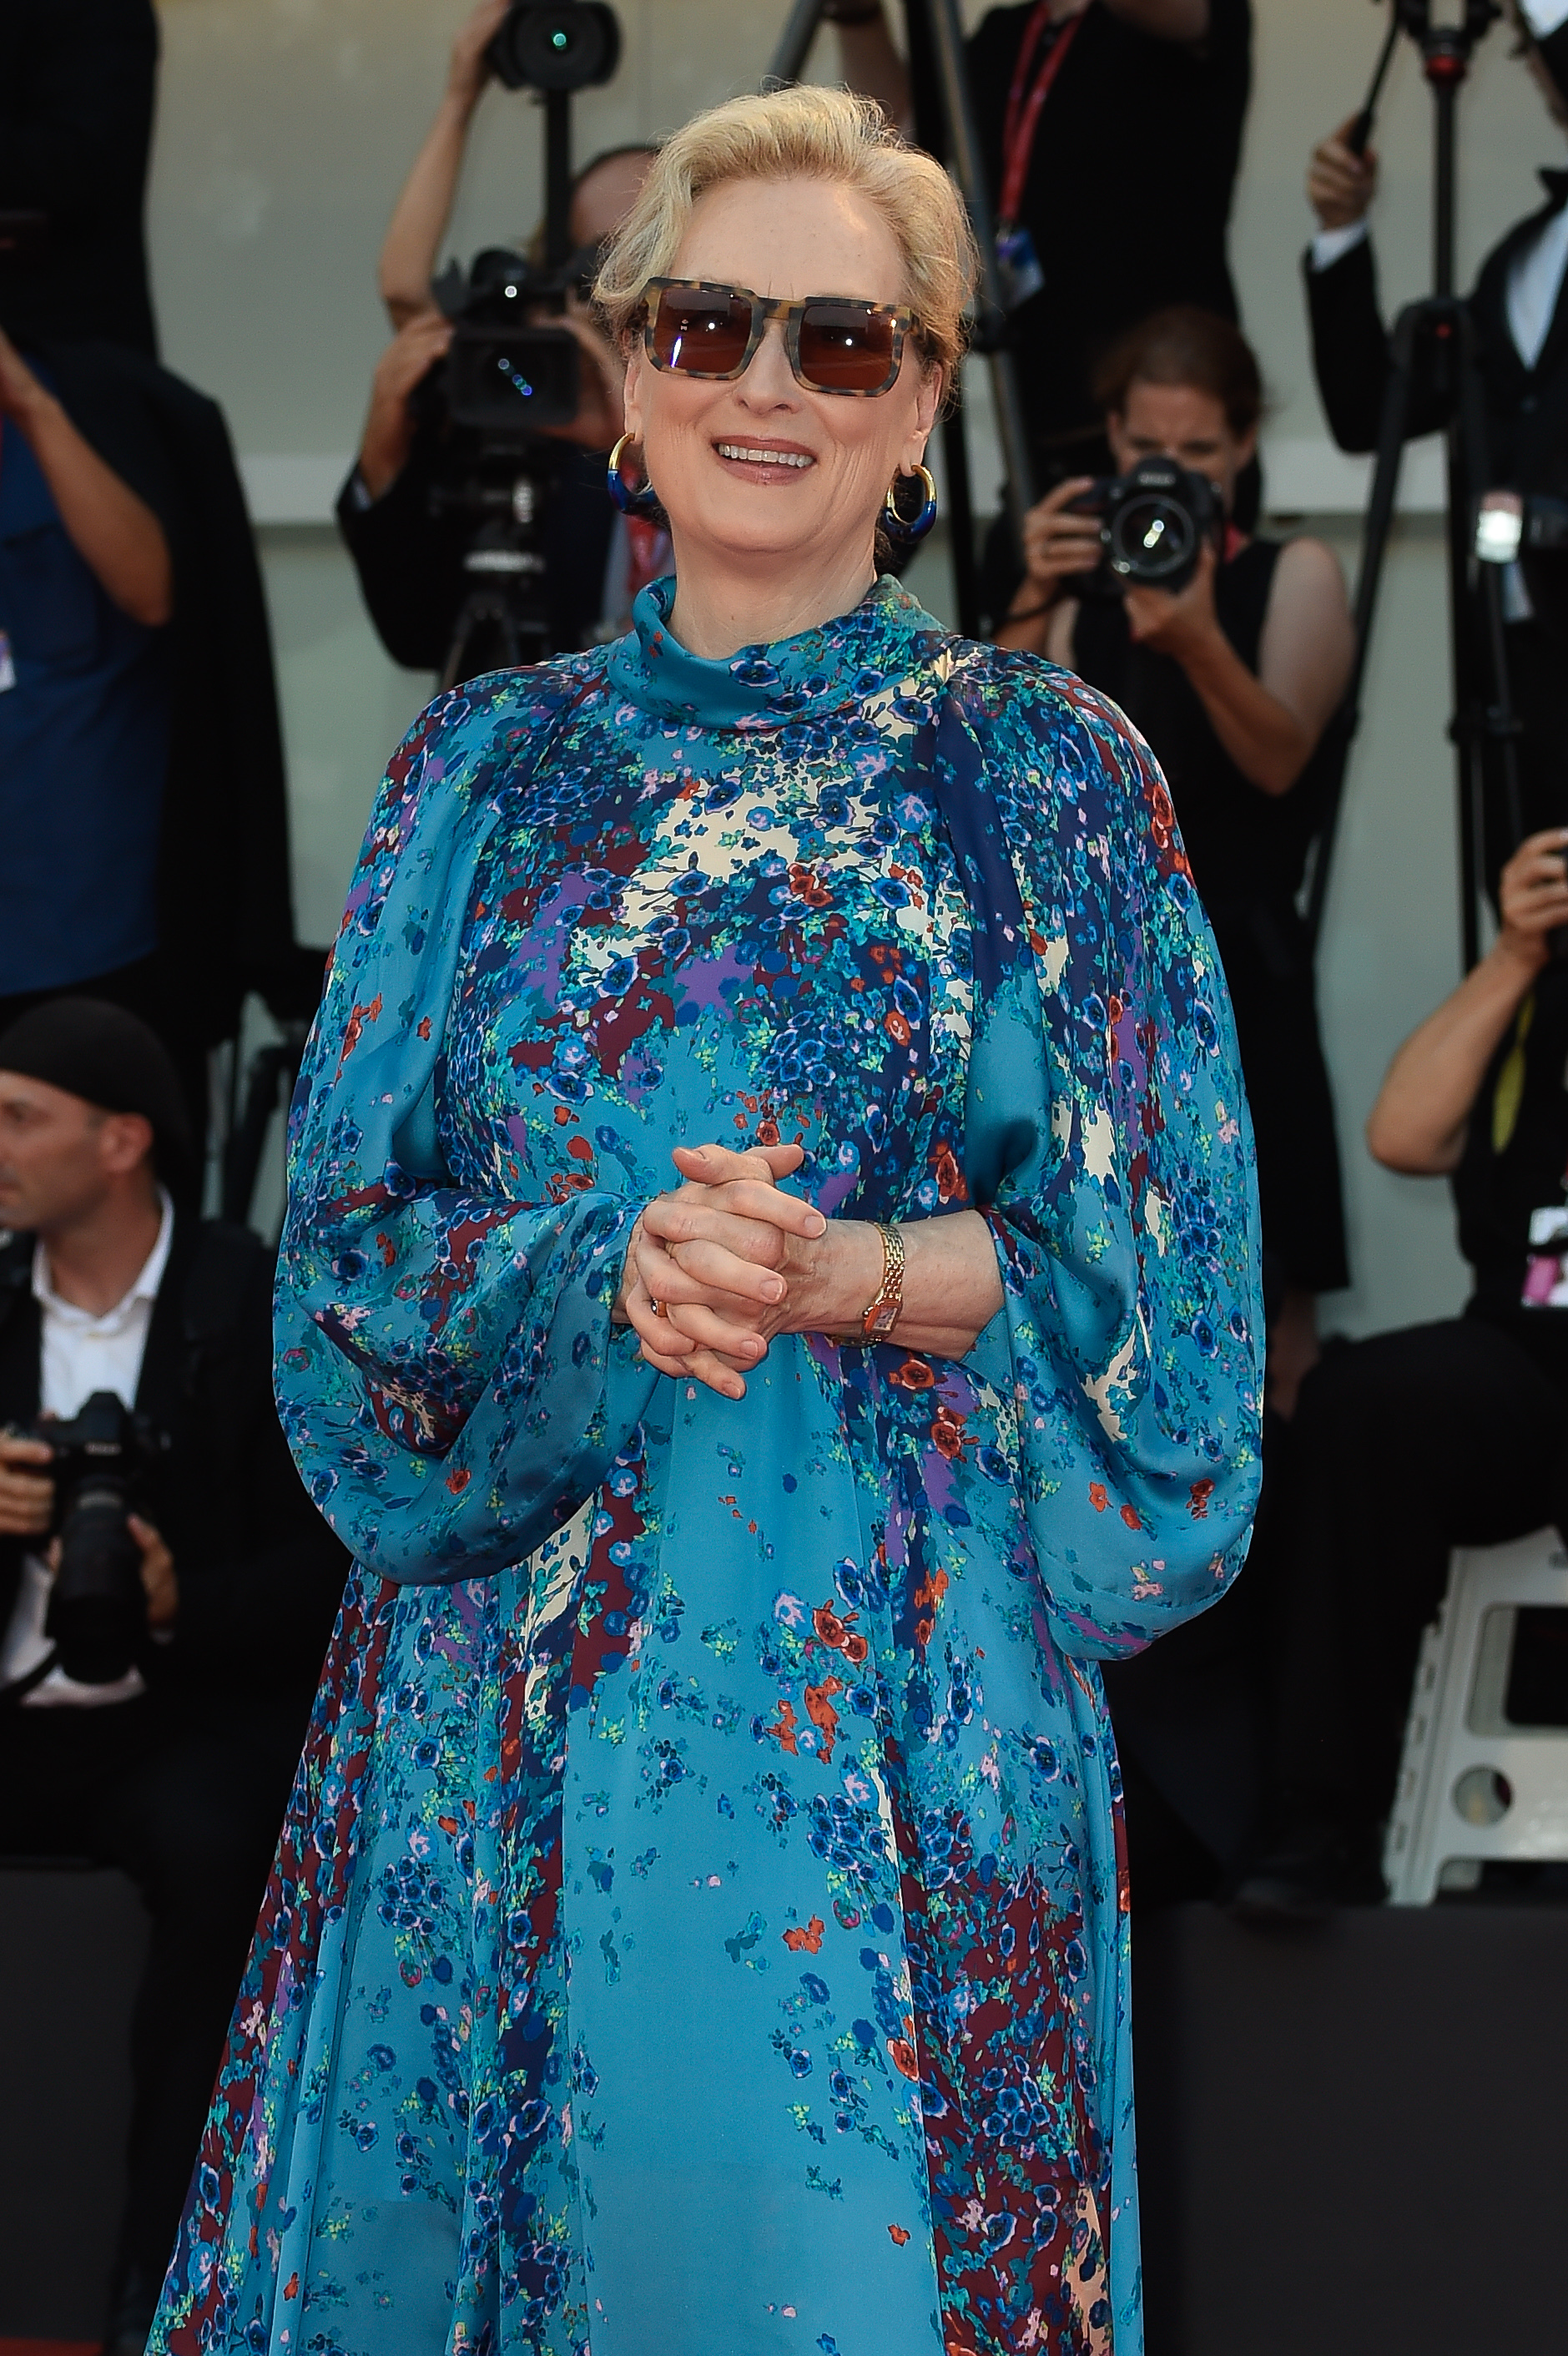 Meryl Streep at the 76 Venice International Film Festival in Venice, Italy, on September 1, 2019. | Source: Getty Images